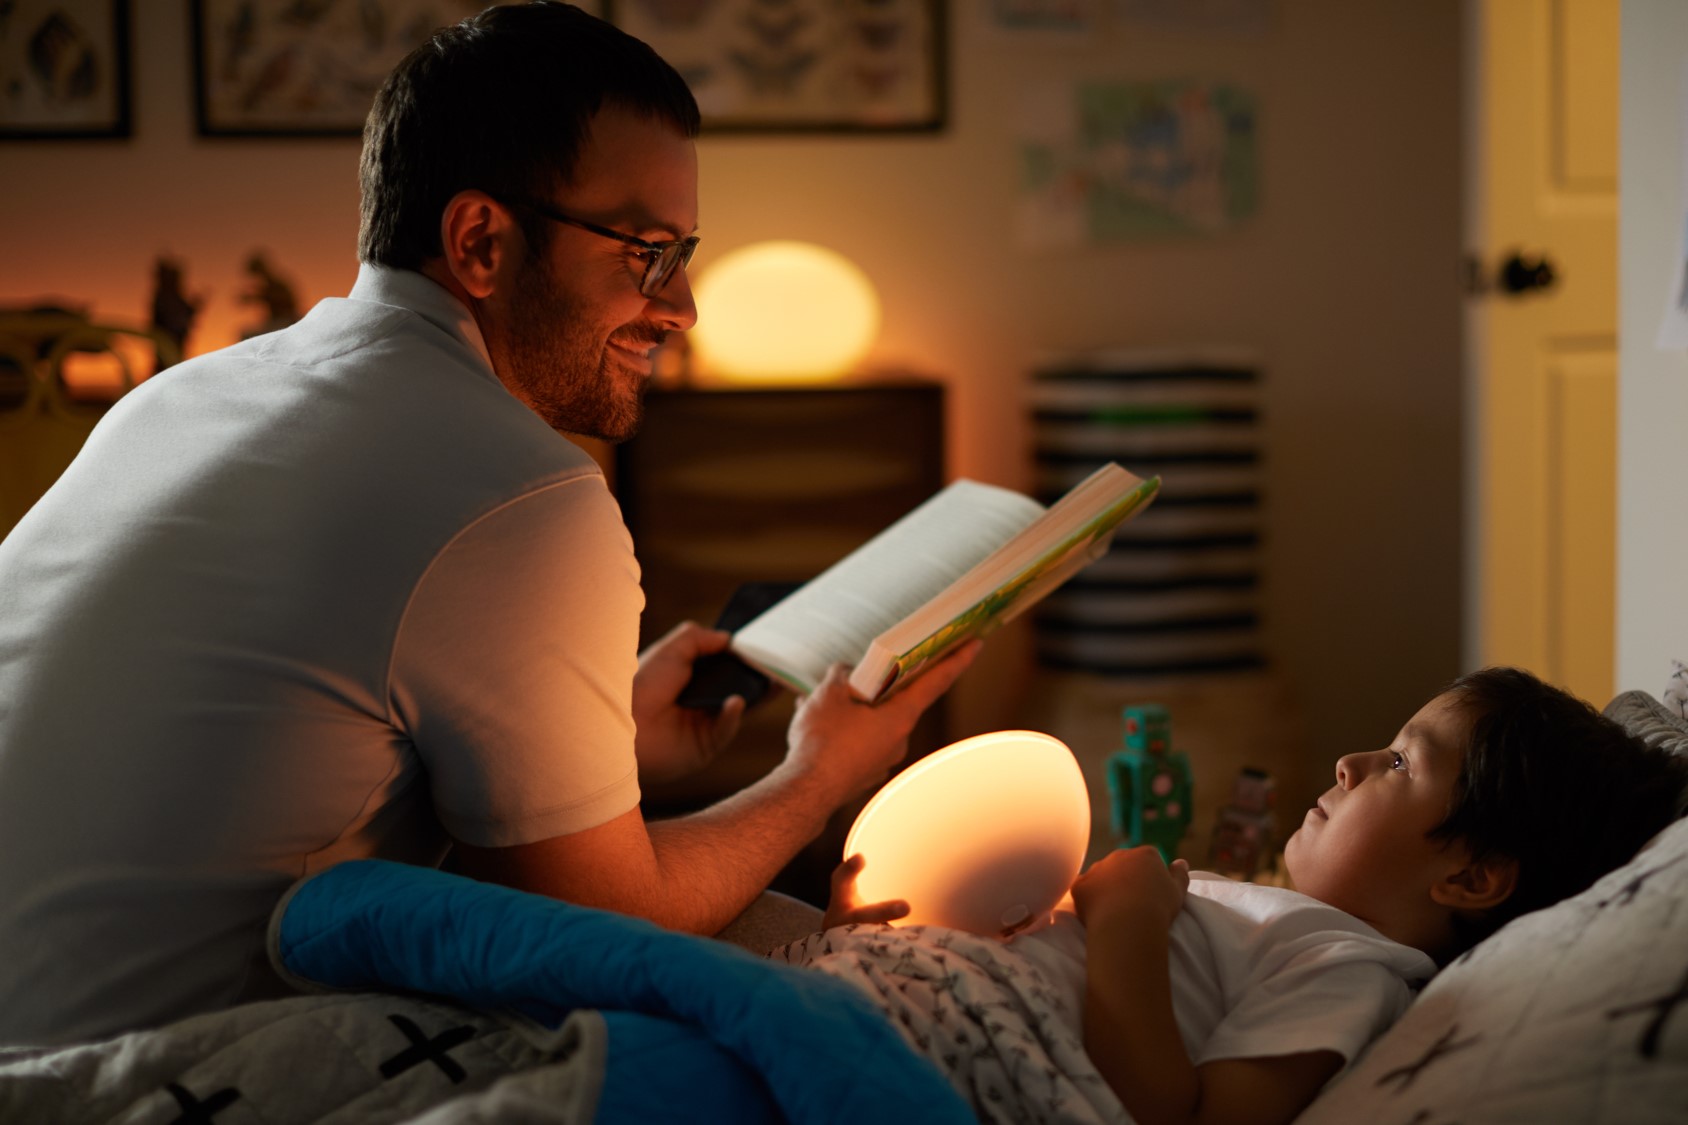 What Philips Hue Should I Buy For Sleep